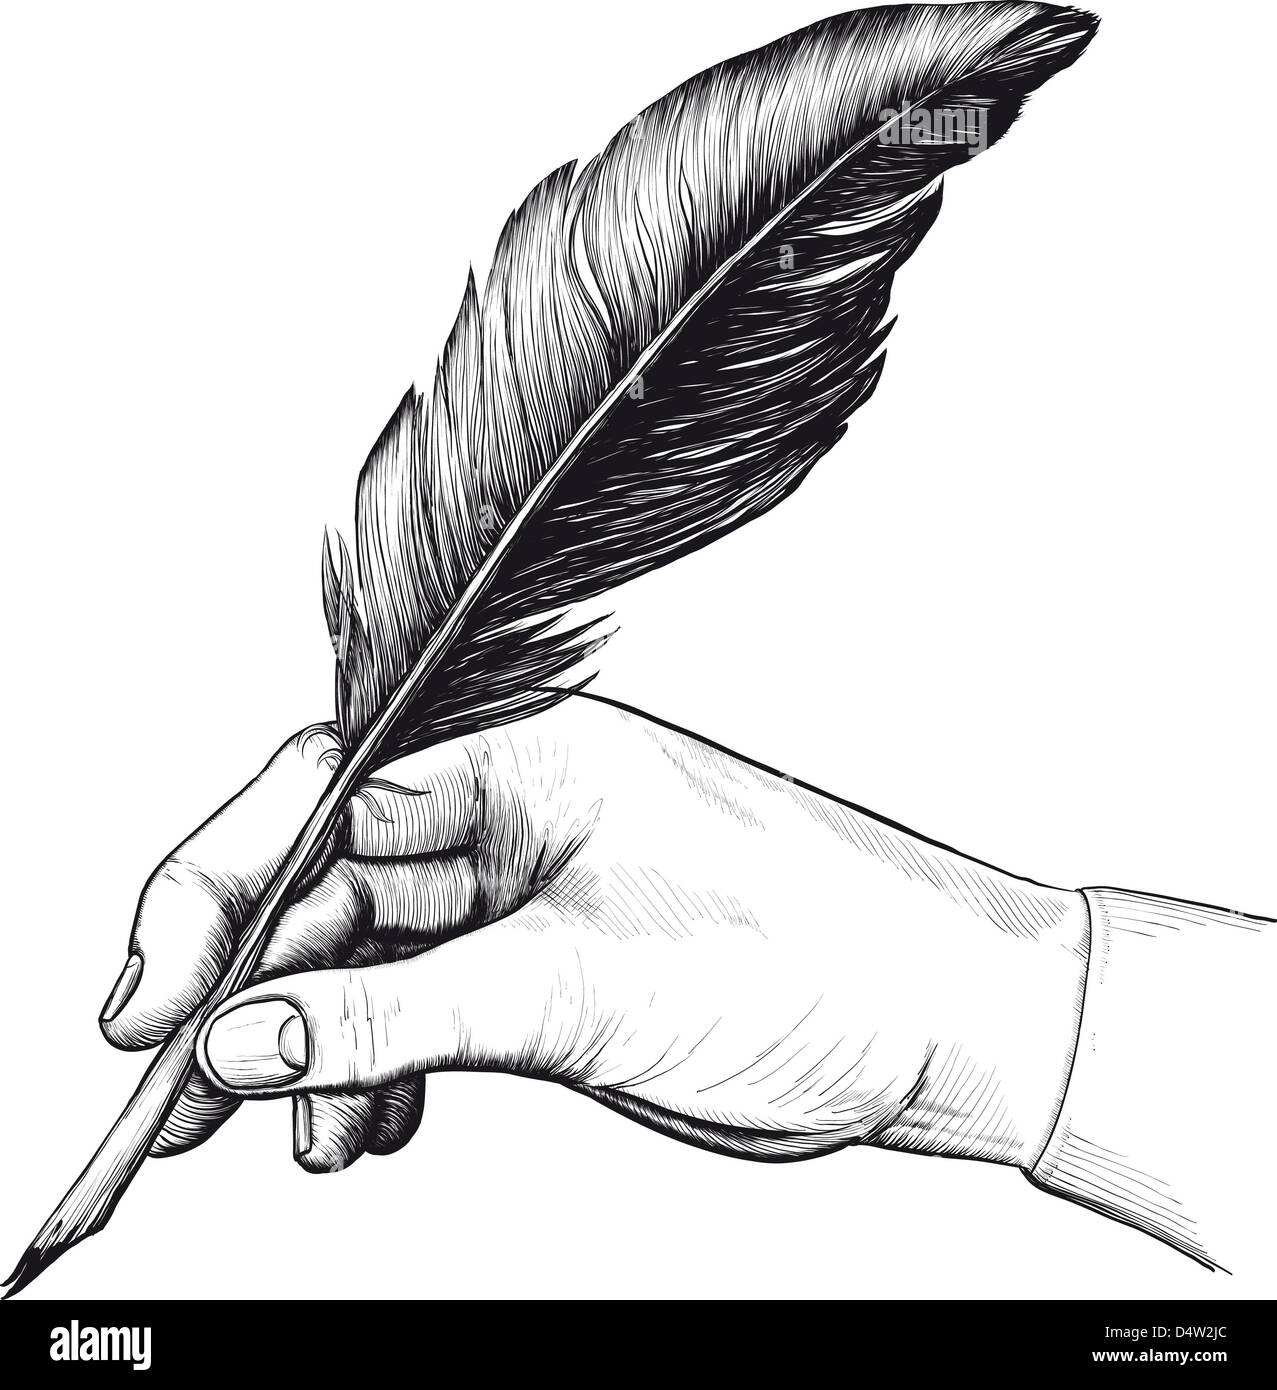 How to Draw a Feather  Steps to Creating an Easy Feather Drawing